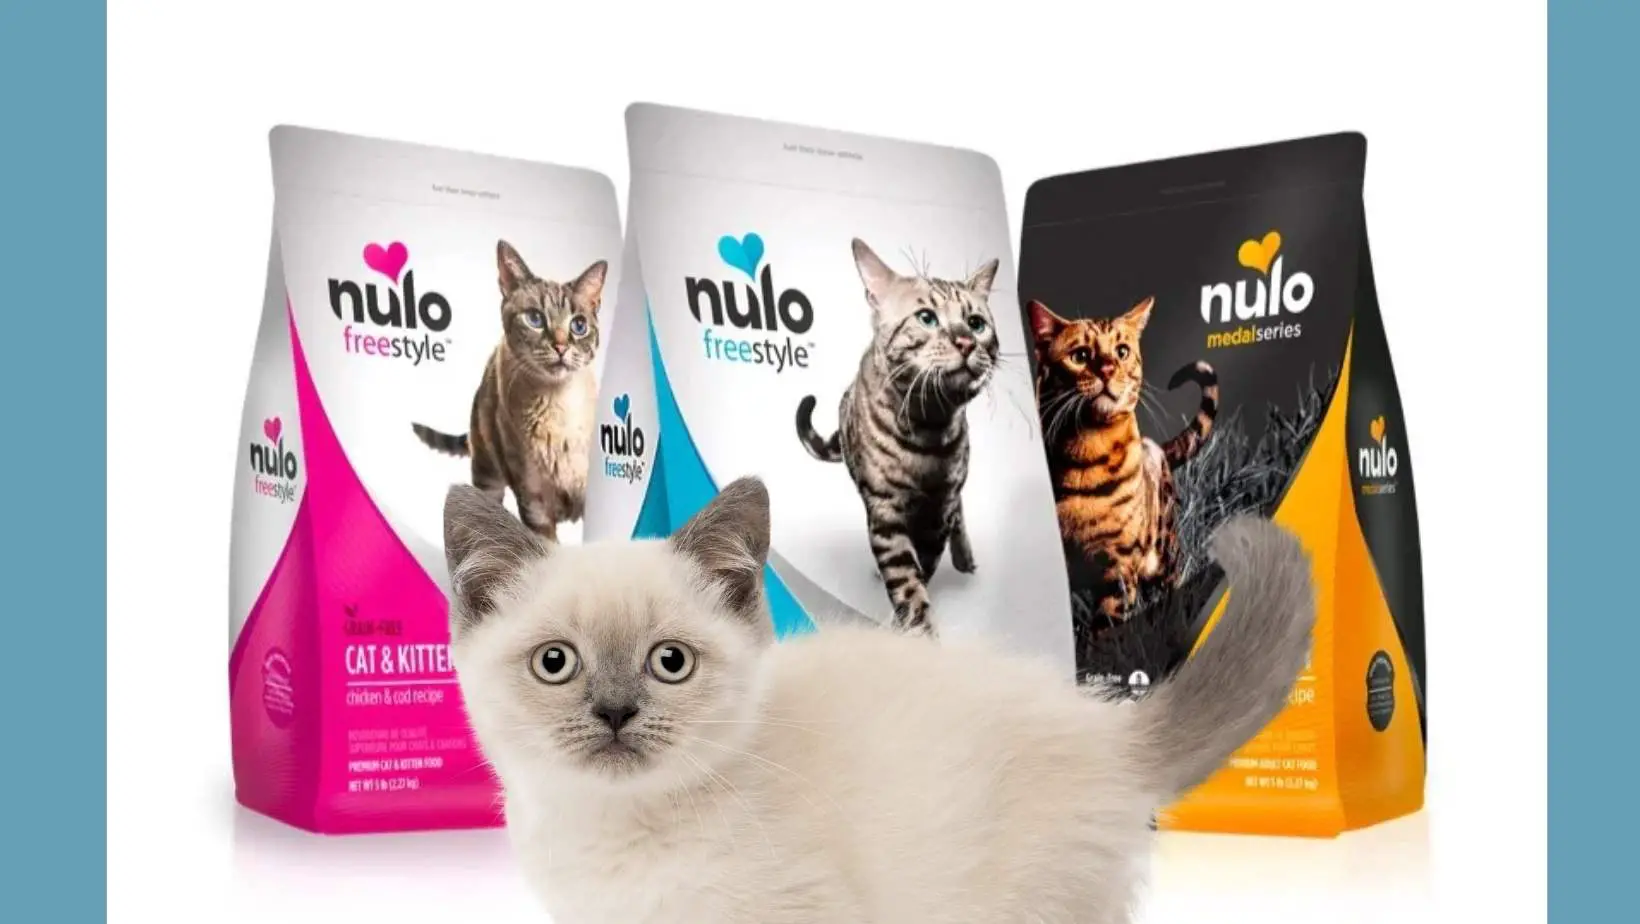 Is Nulo a Good Cat Food?